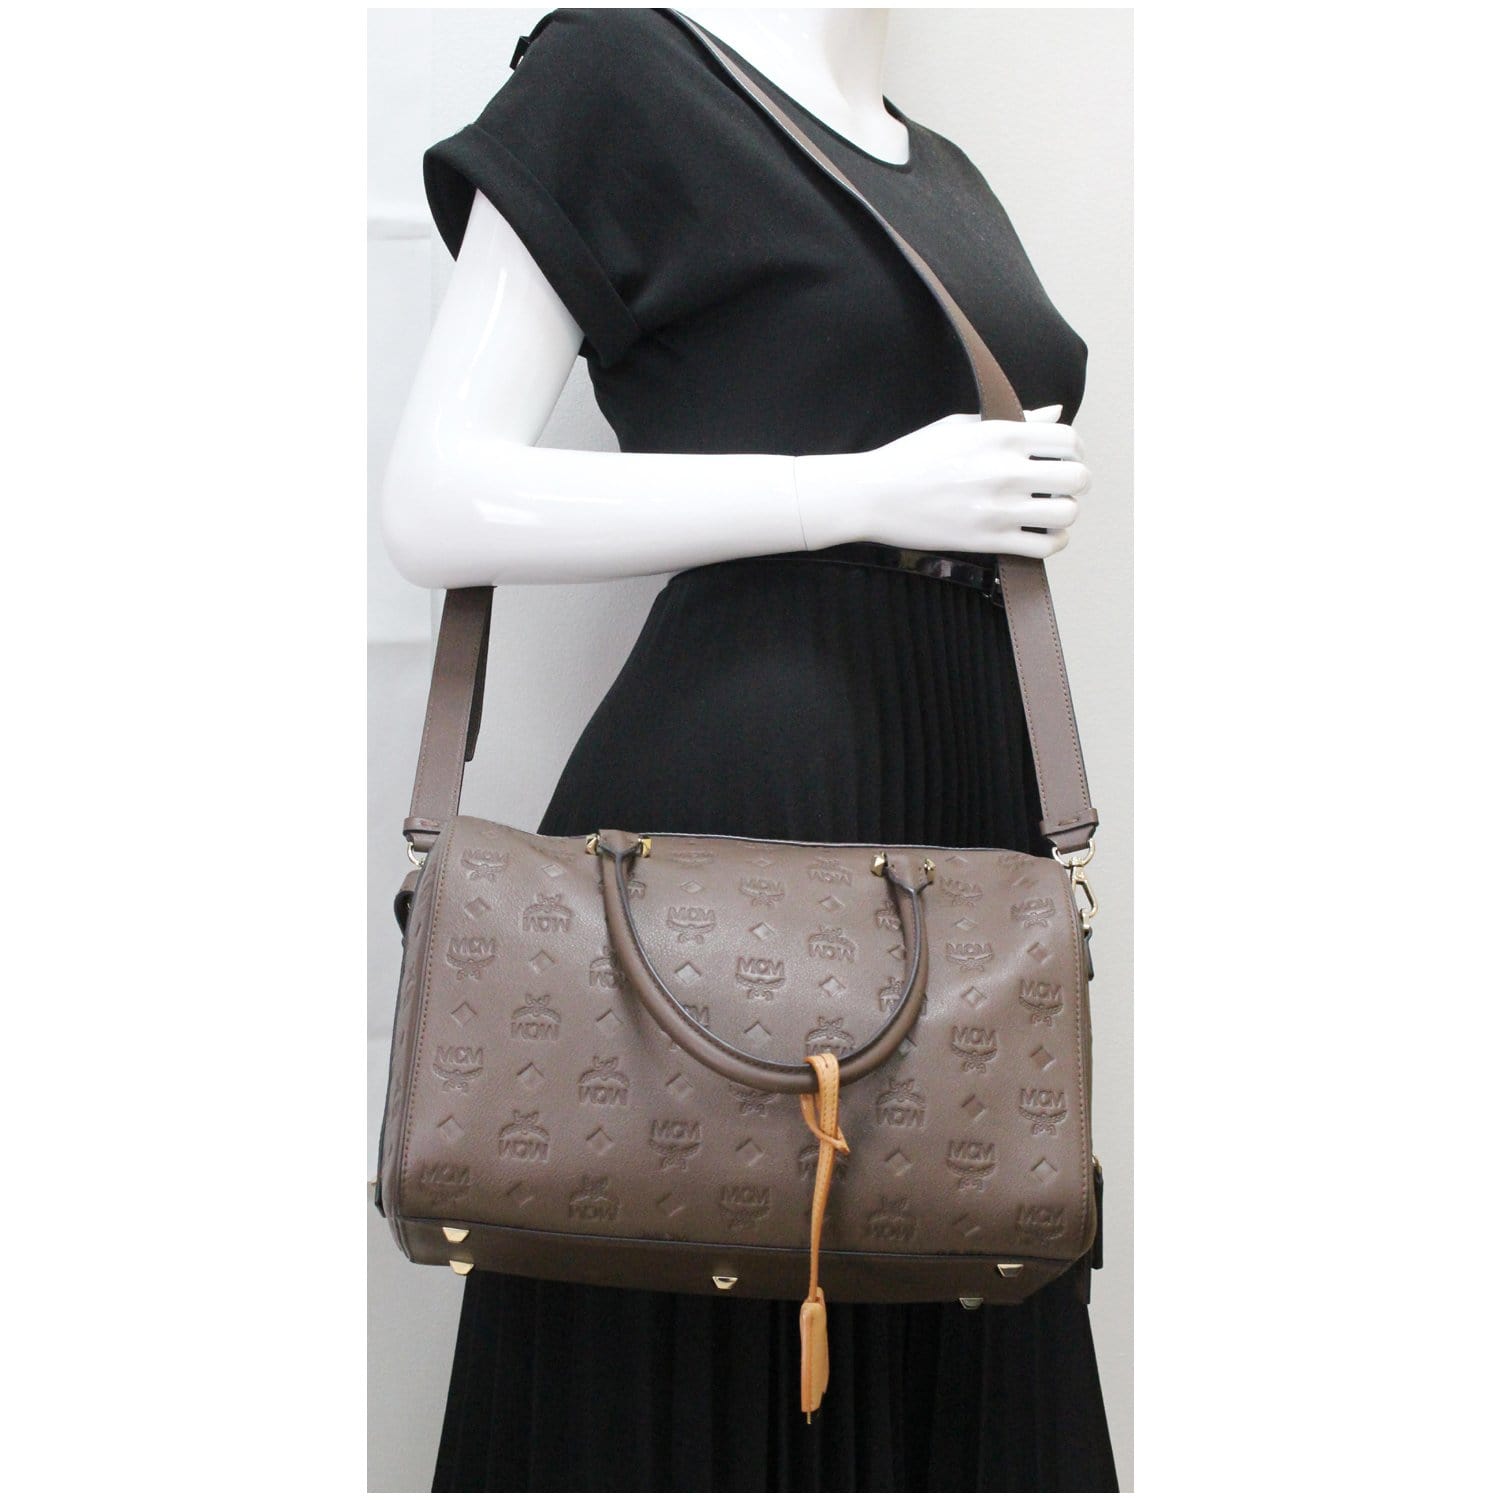 Mcm - Authenticated Boston Handbag - Leather Brown for Women, Good Condition